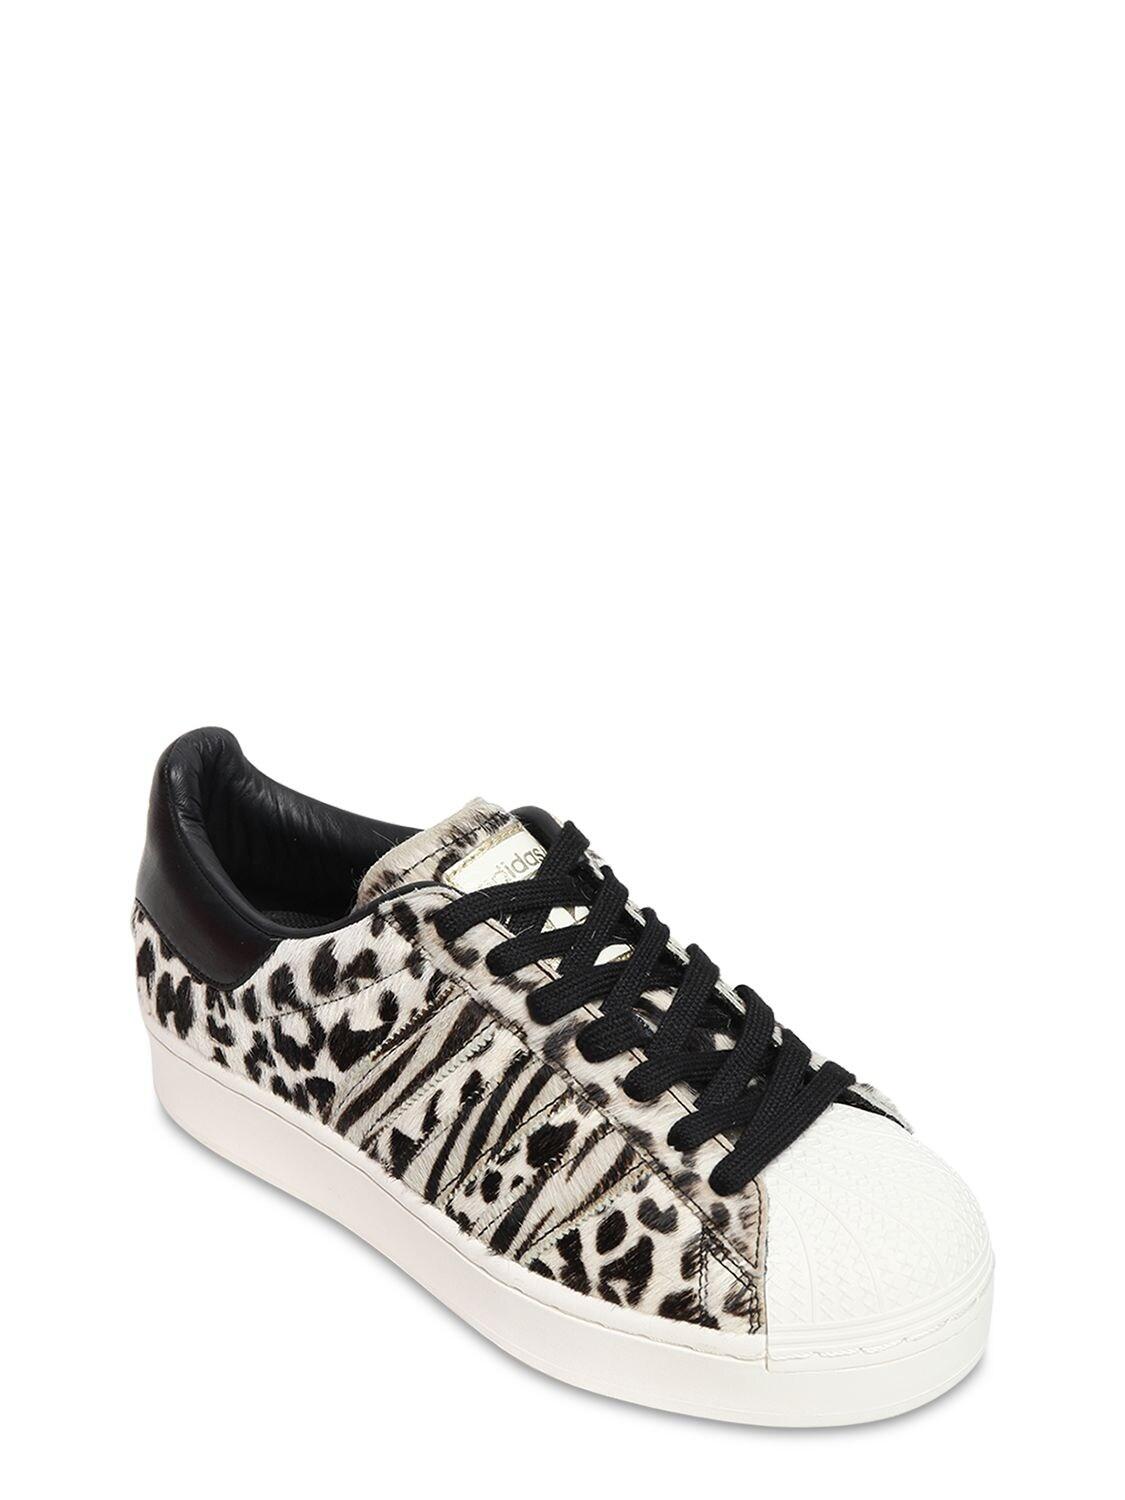 adidas Originals Leather Superstar Bold Sneakers In Animal Print in Black |  Lyst